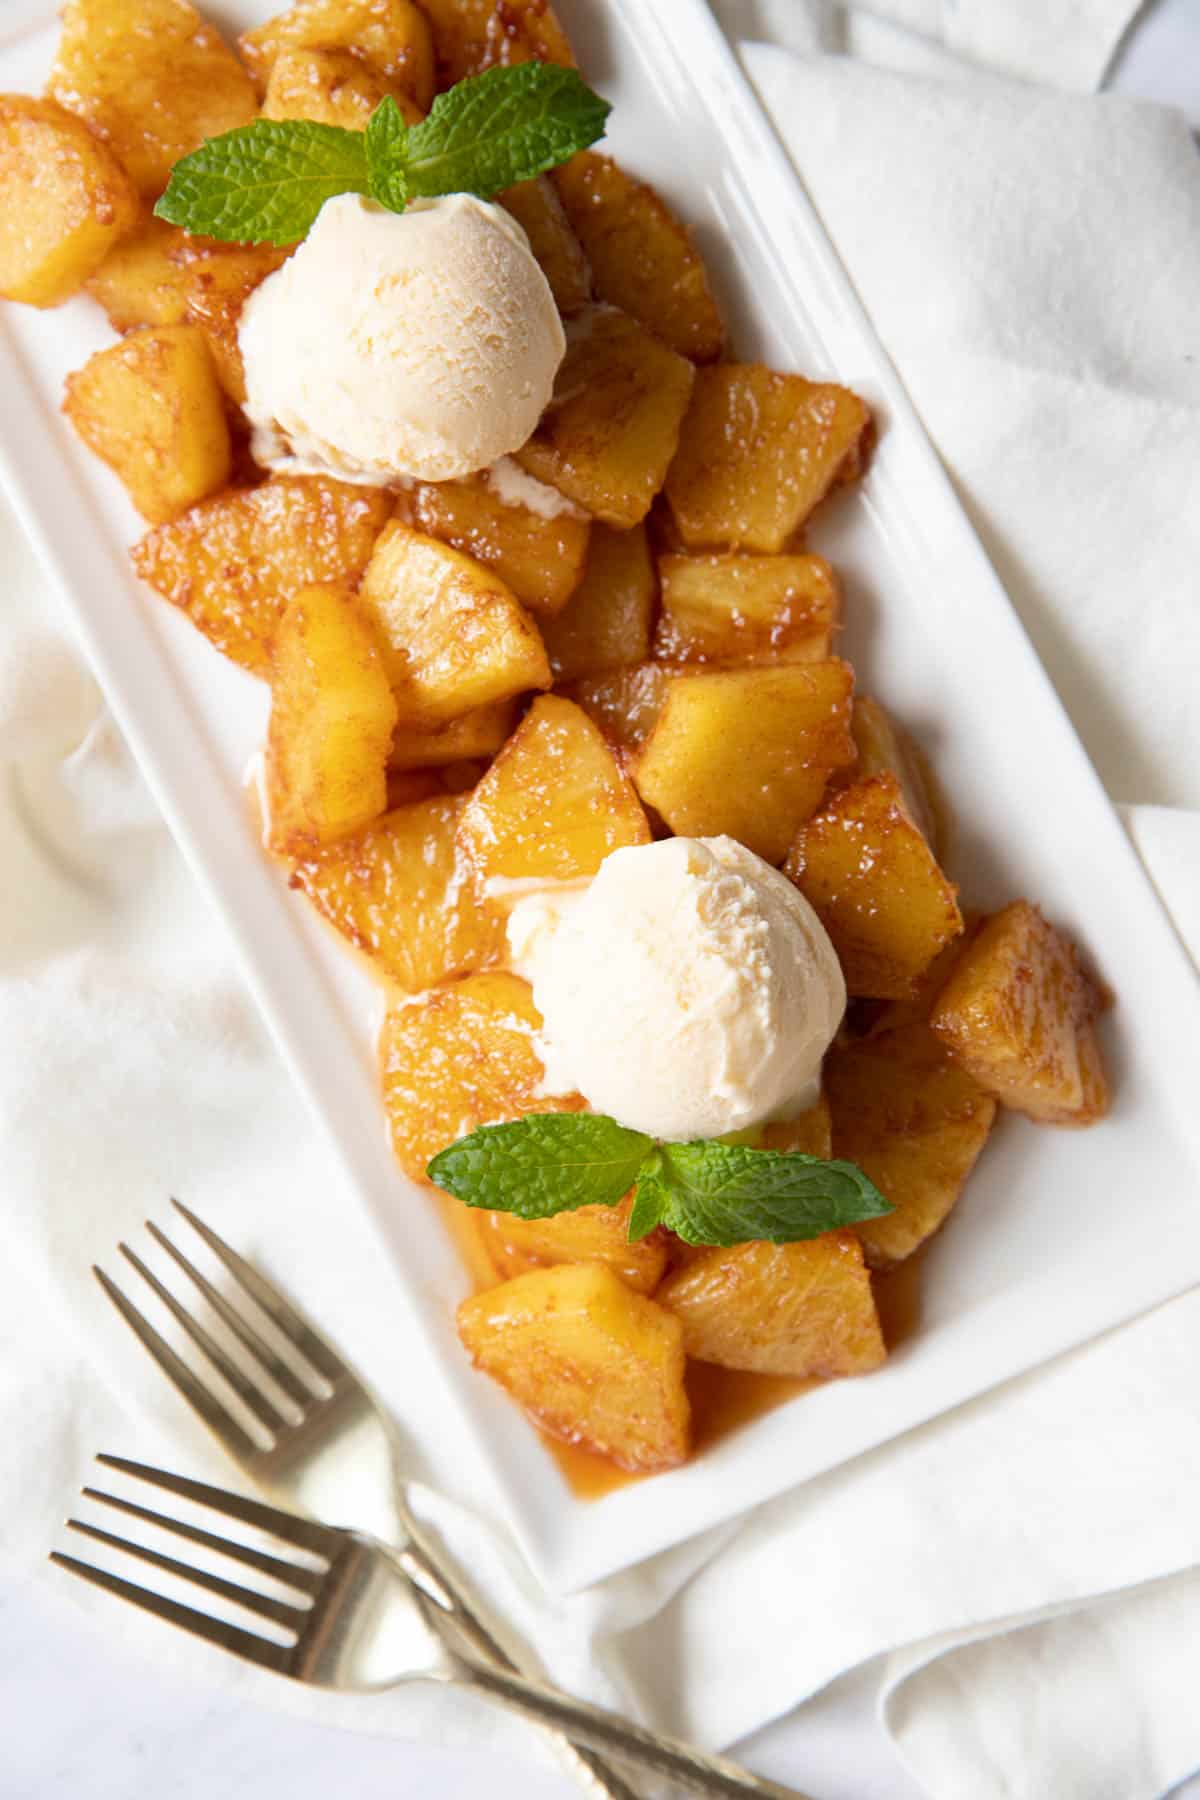 Fried pineapple served on a white serving plate with two scoops of vanilla ice cream and fresh mint leaves garnished on top. Two forks sit on the side of the plate.